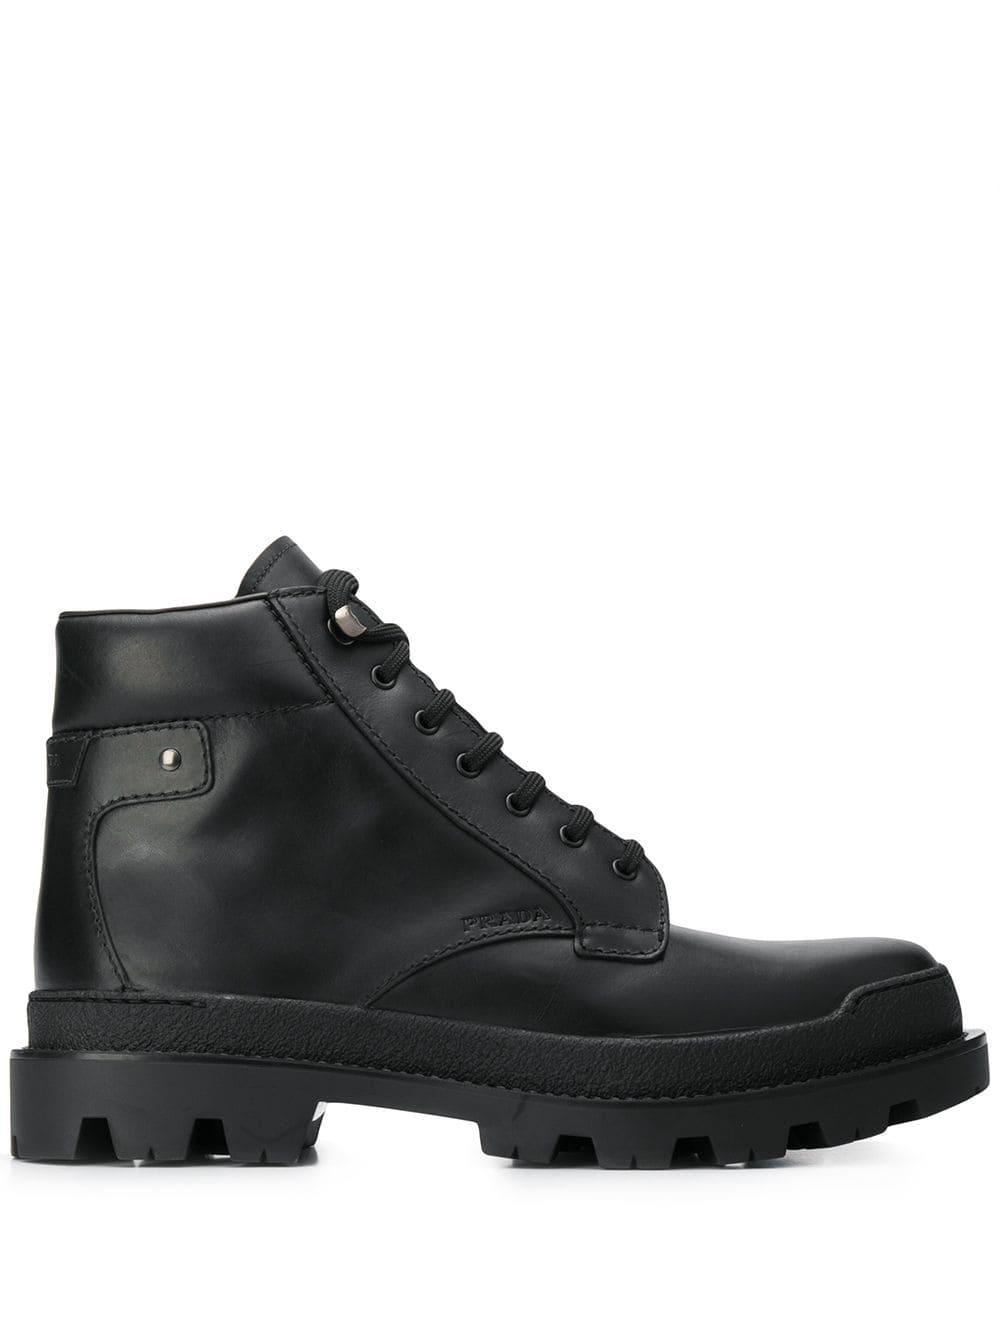 Prada Leather Lace-up Hiking Boots in Black for Men - Lyst